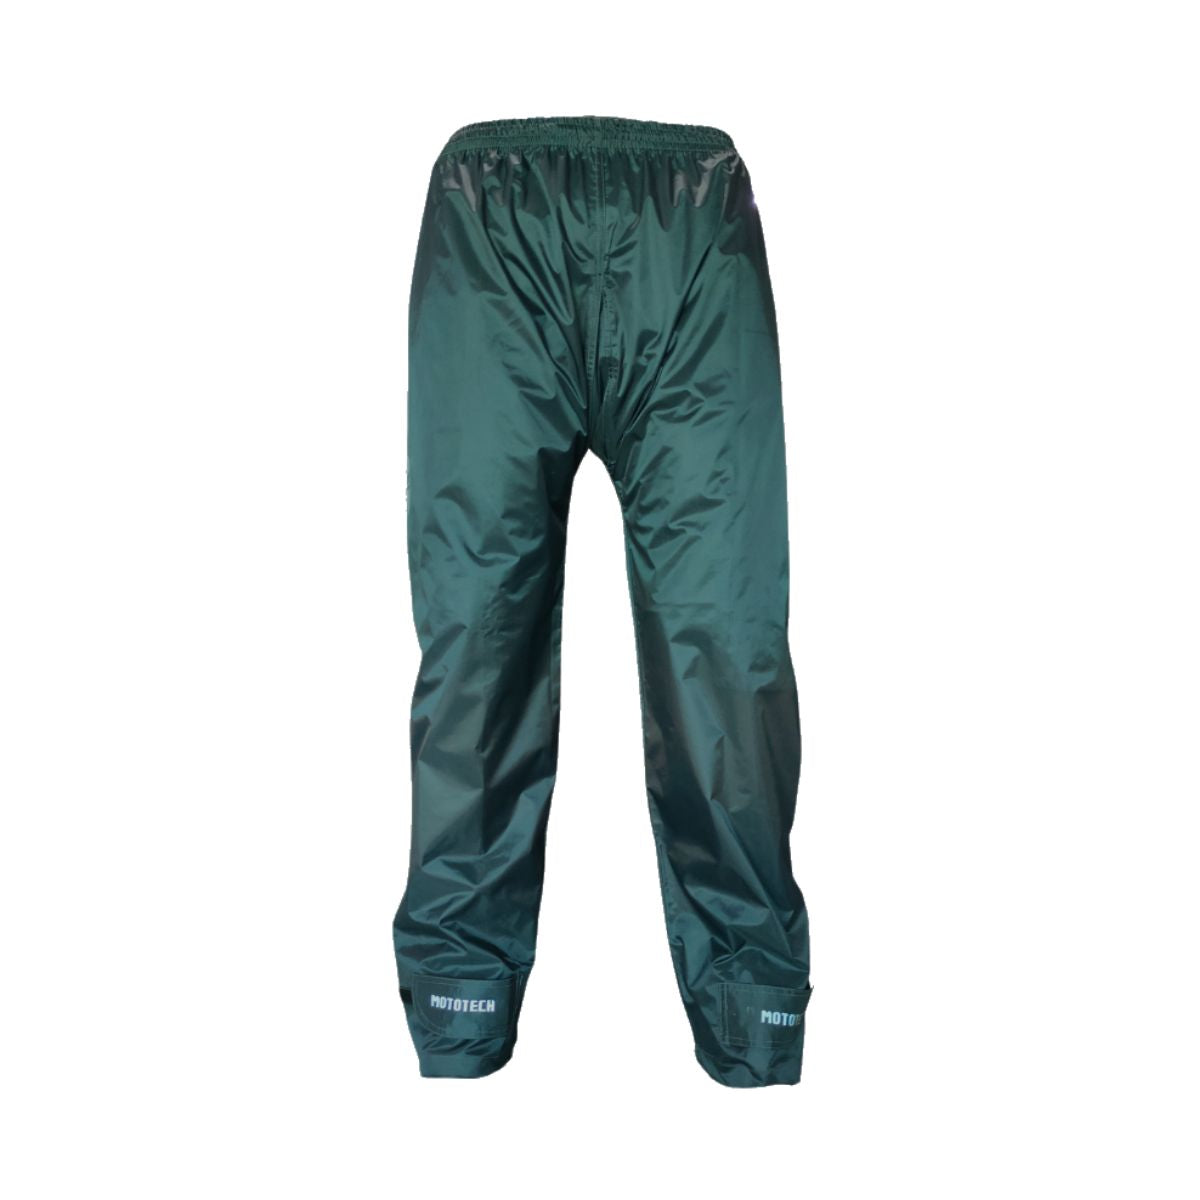 Royal Enfield Ceara Black Riding Trouser  Buy online in India